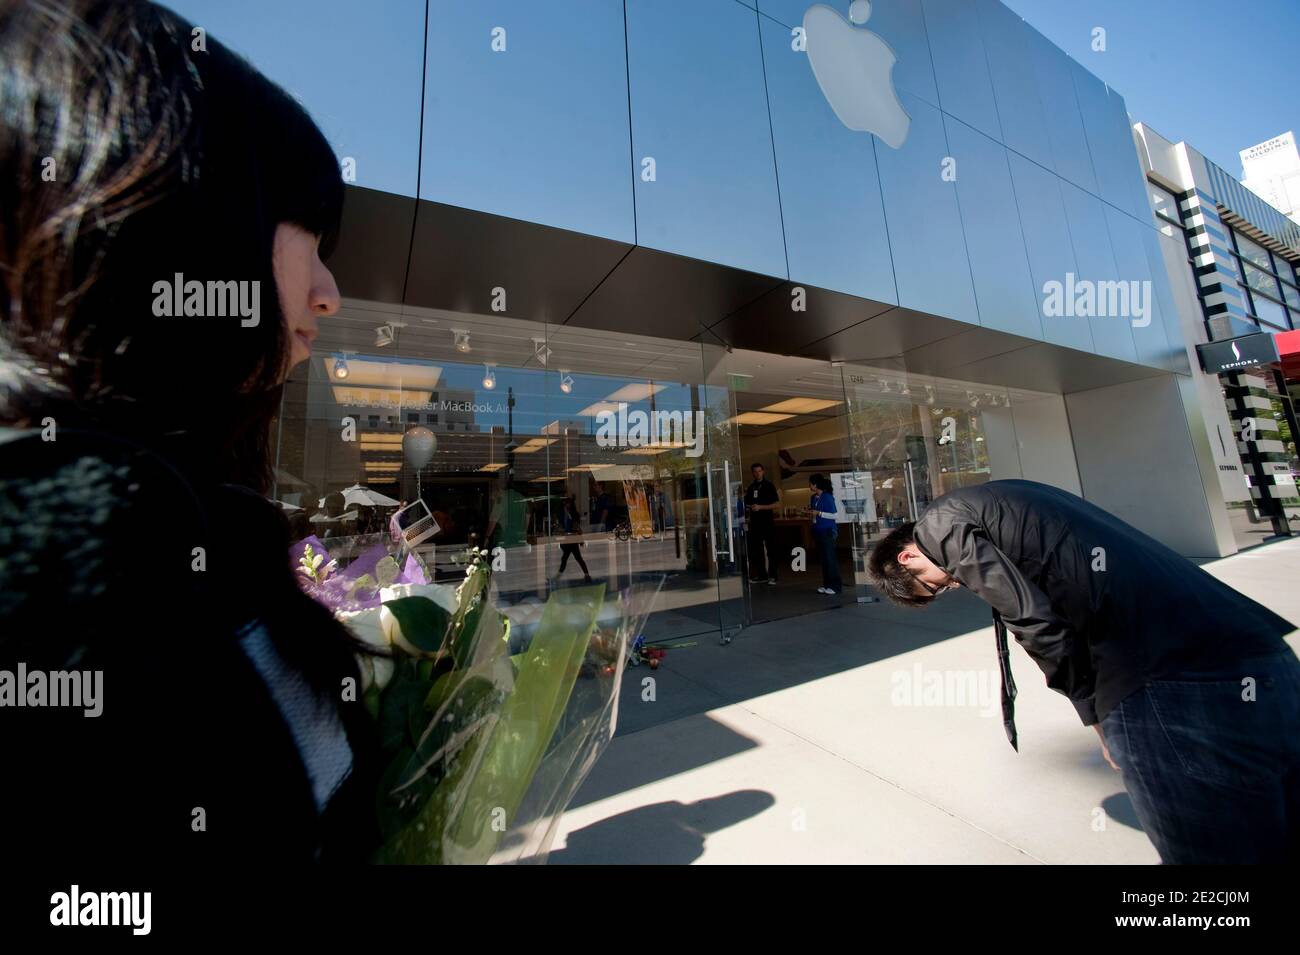 Atmosphere around the Santa Monica Apple Store after the death of Steve Jobs who passed away on October 5 from pancreatic cancer. Los Angeles, CA, USA, October 6, 2011. Photo by Lionel Hahn/ABACAPRESS.COM Stock Photo